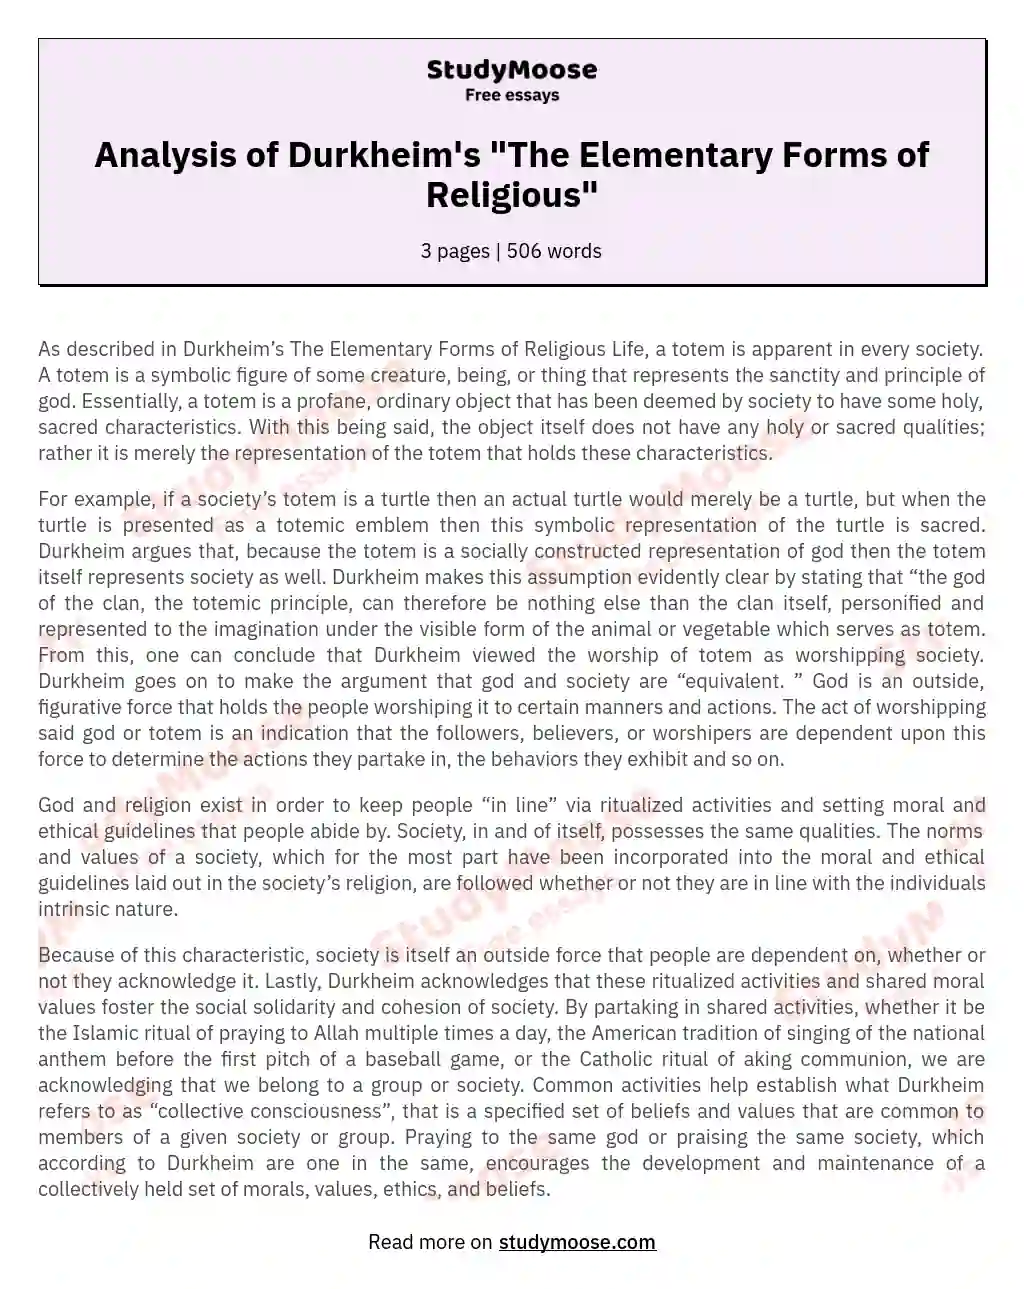 Analysis of Durkheim's "The Elementary Forms of Religious" essay